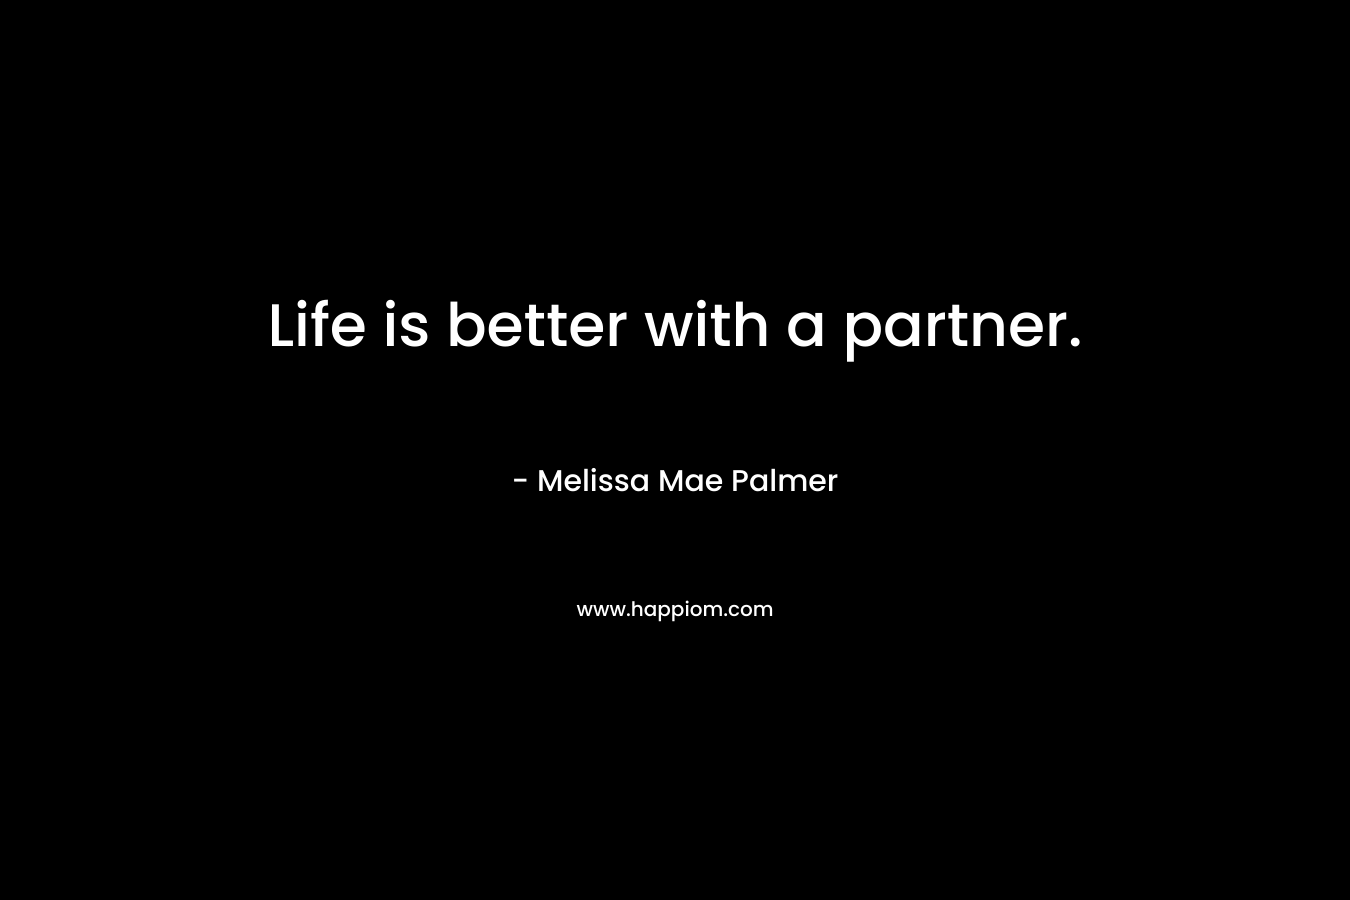 Life is better with a partner.